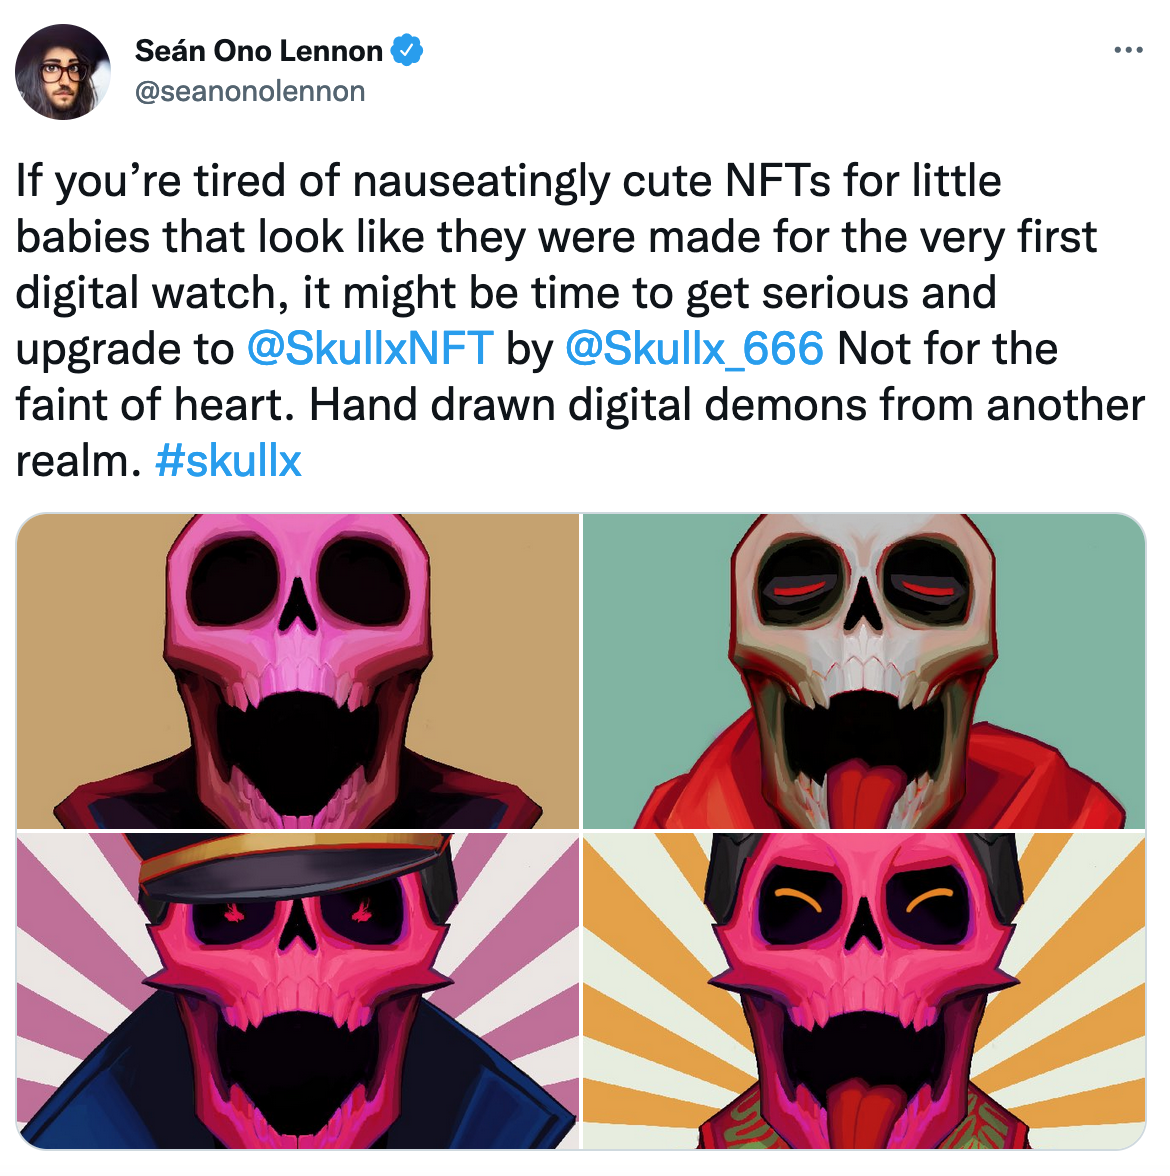 Tweet av Sean Ono Lennon: If you’re tired of nauseatingly cute NFTs for little babies that look like they were made for the very first digital watch, it might be time to get serious and upgrade to @SkullxNFT by @Skullx_666 Not for the faint of heart. Hand drawn digital demons from another realm. #skullx